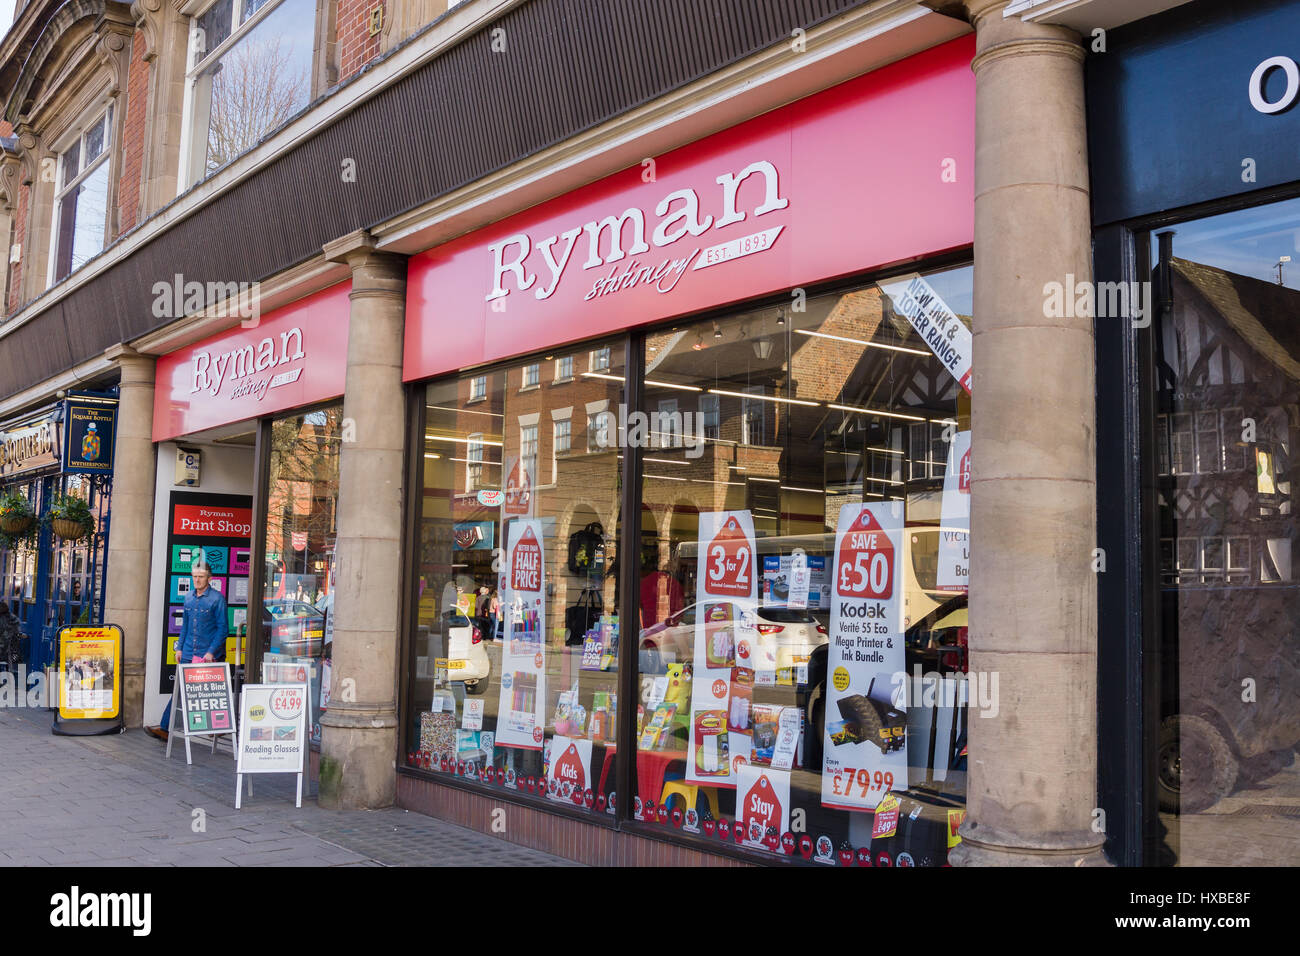 Rymans stationery outlet the company established in 1893 has 220 stores around the UK Stock Photo